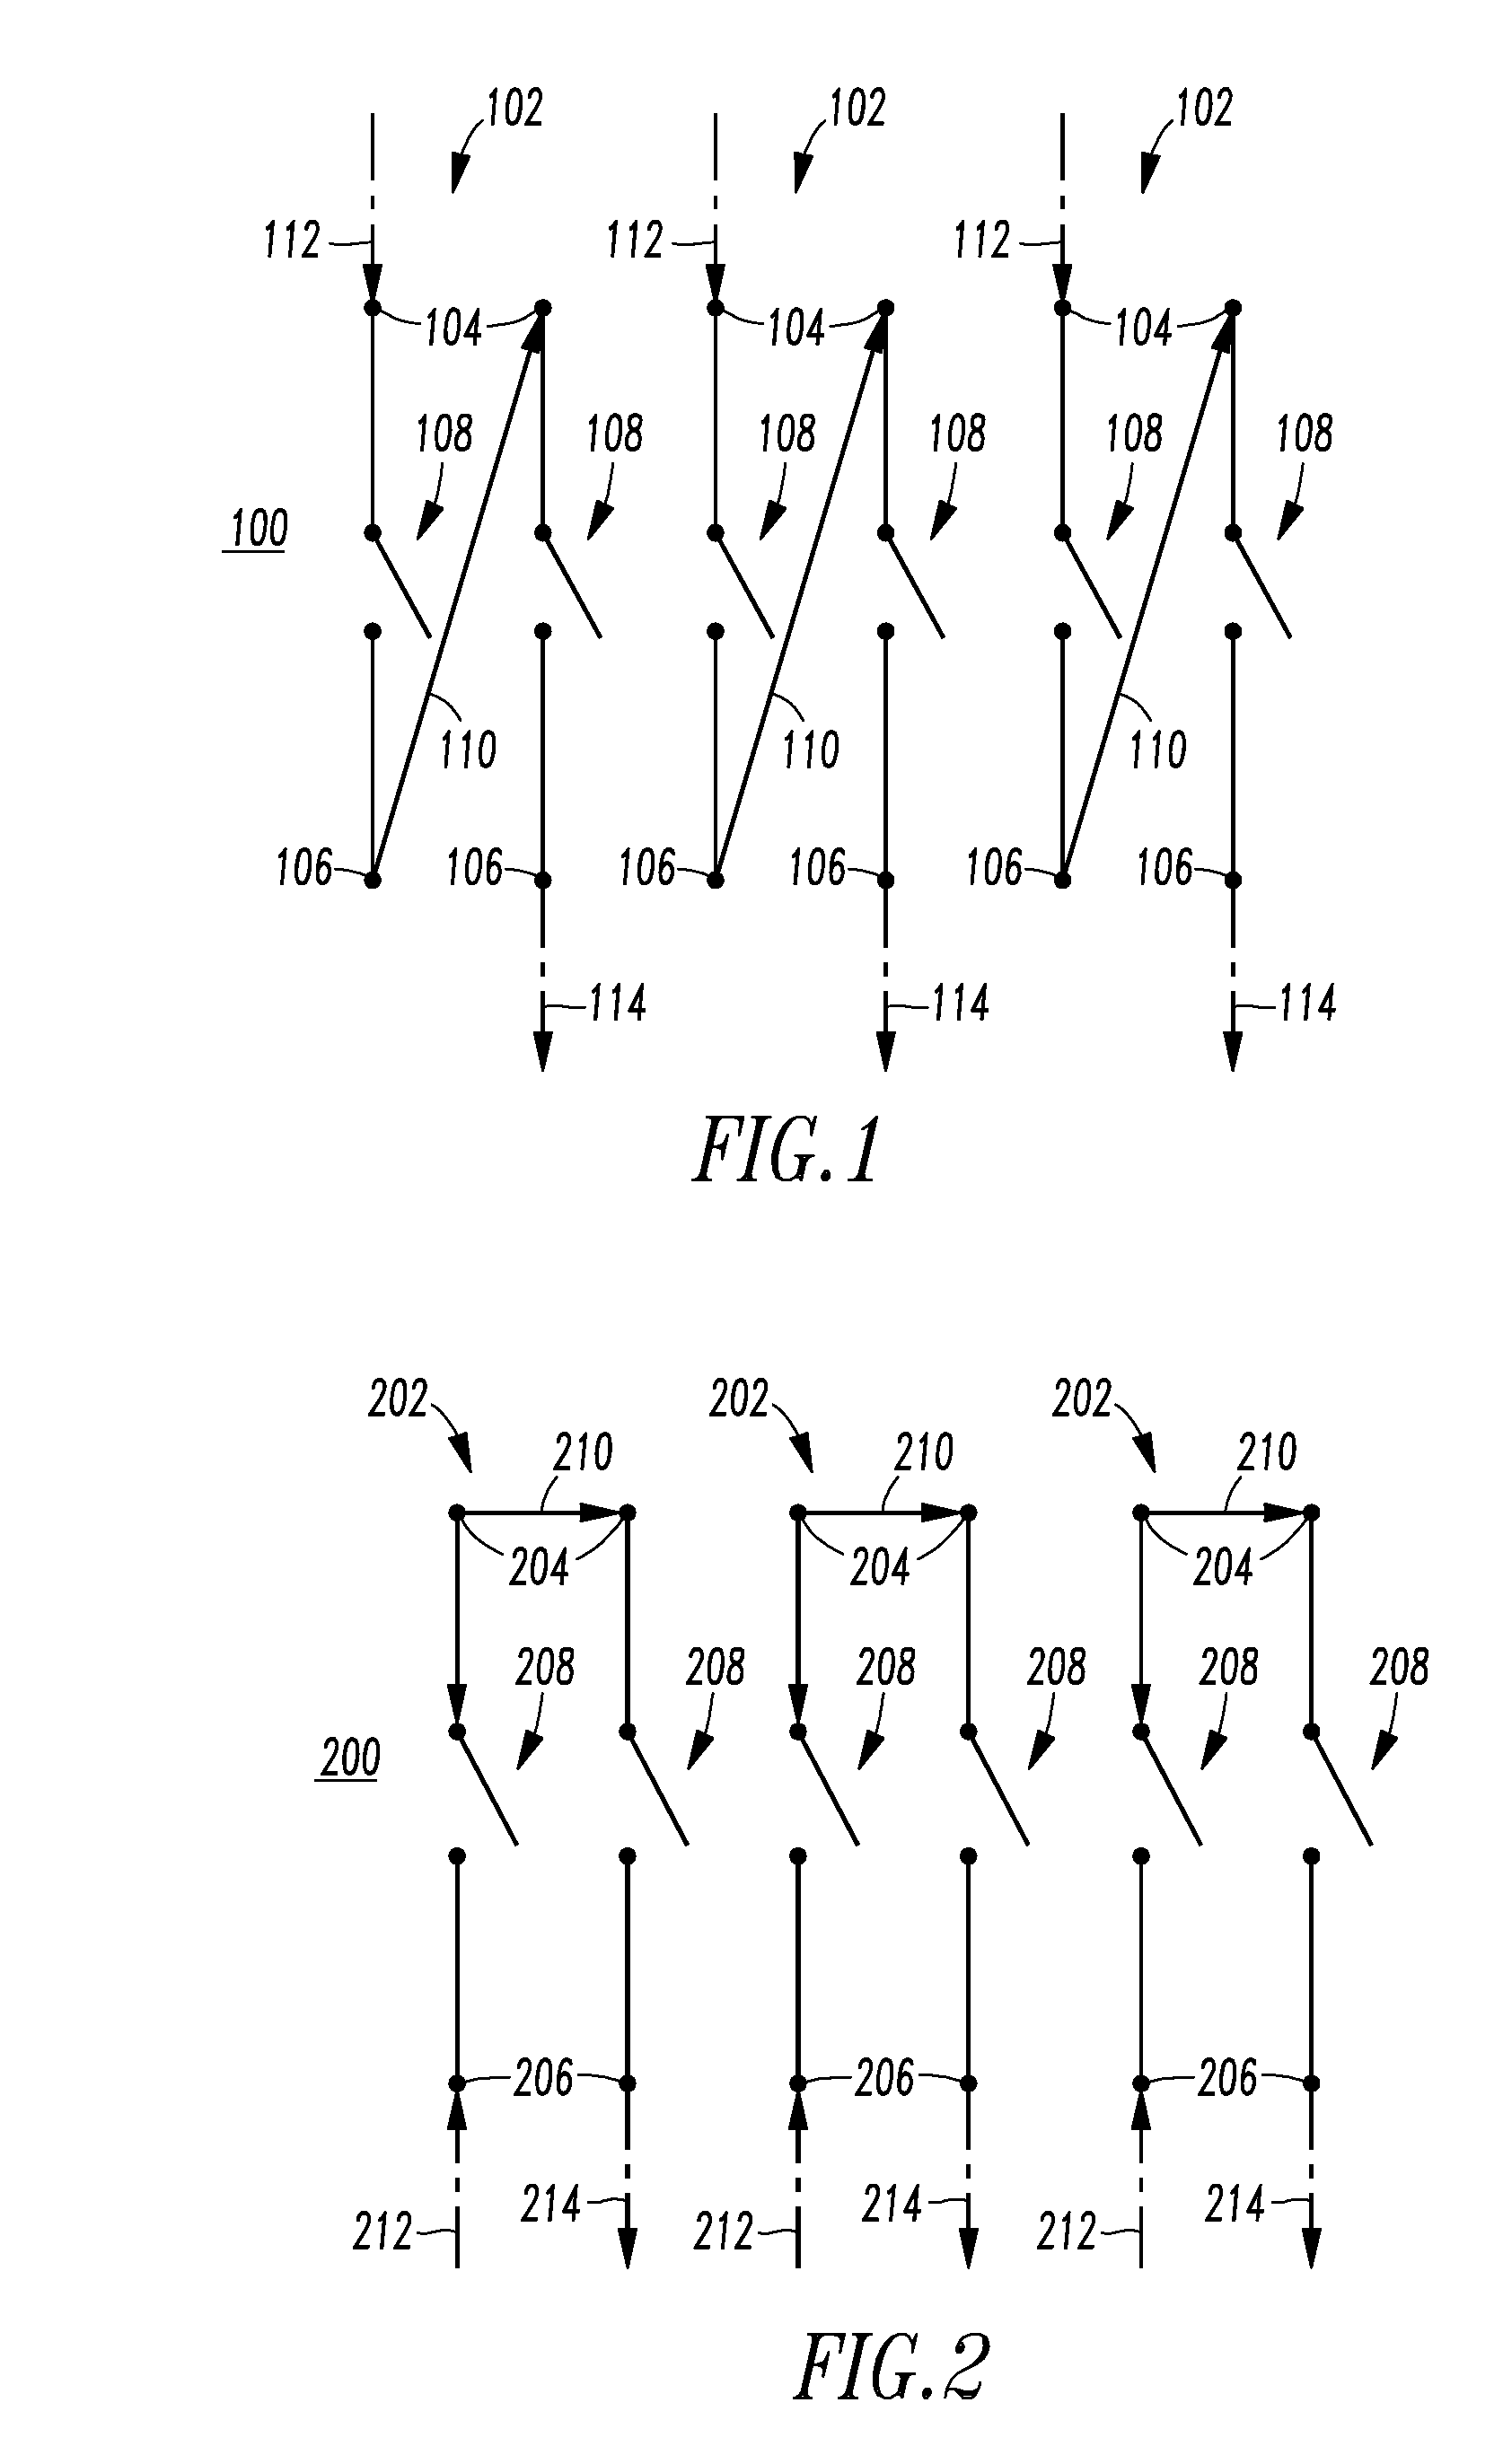 Configurable electrical switching apparatus including a plurality of separable contacts and a plurality of field-configurable jumpers to provide a number of poles